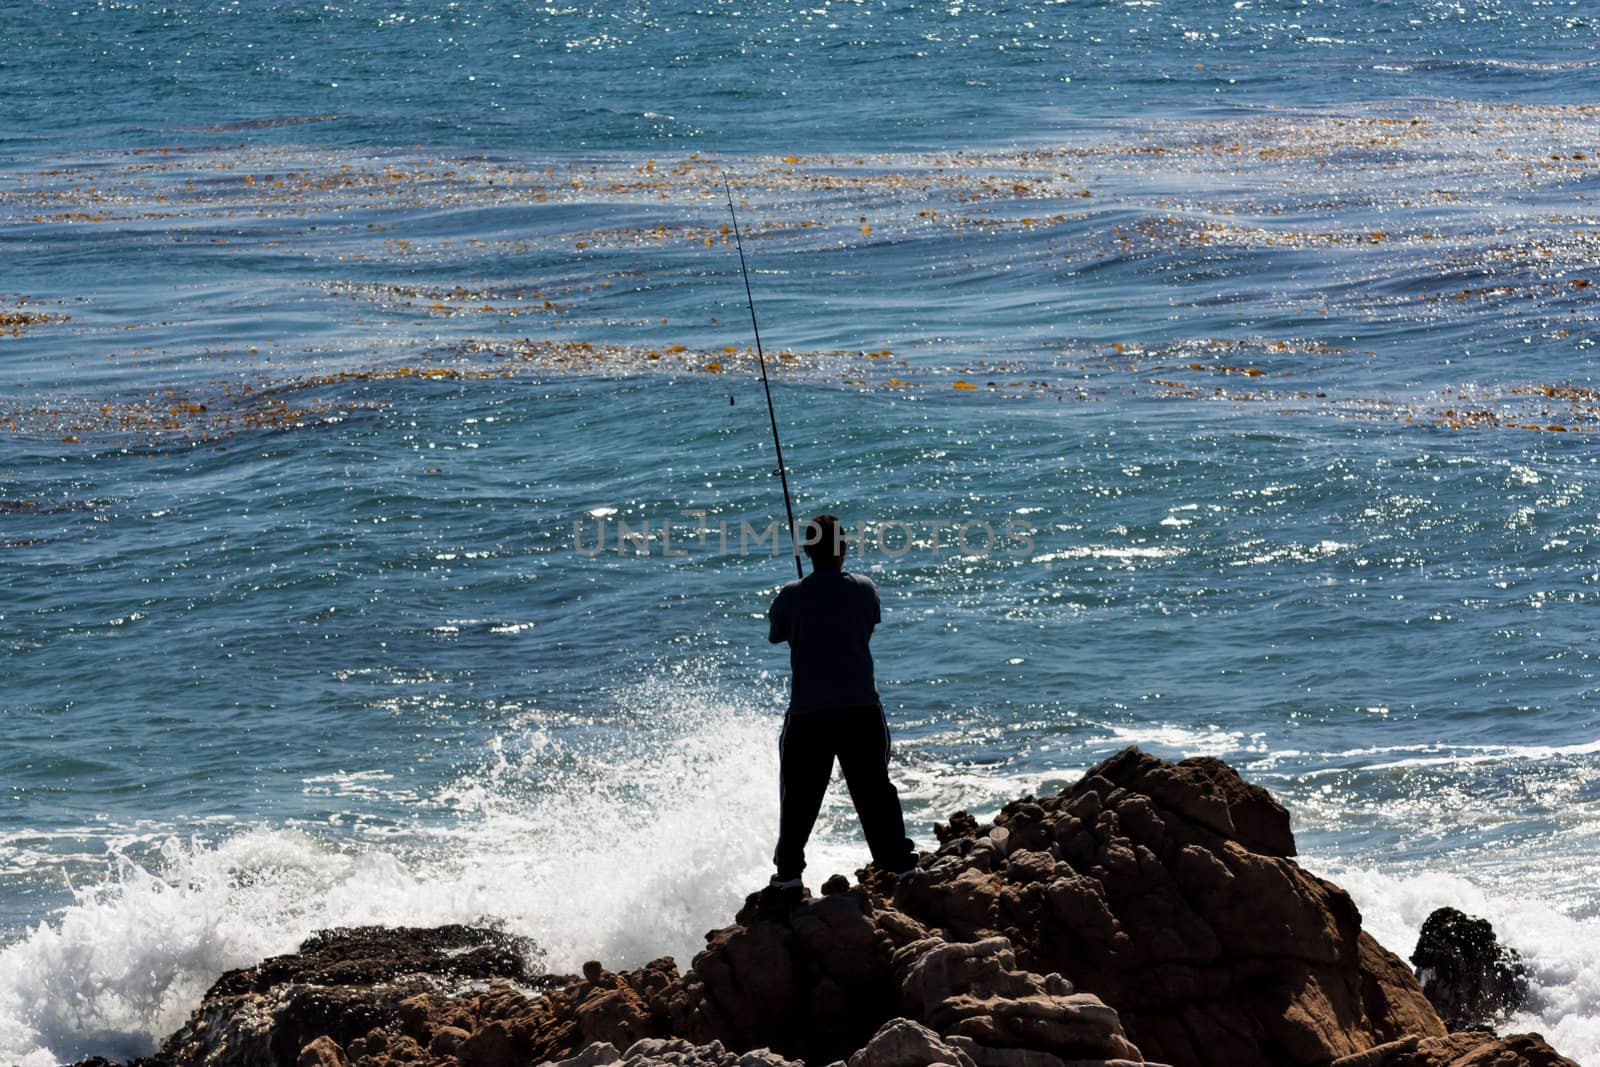 Man Fishes Against the Crashing Ocean Waves by wolterk